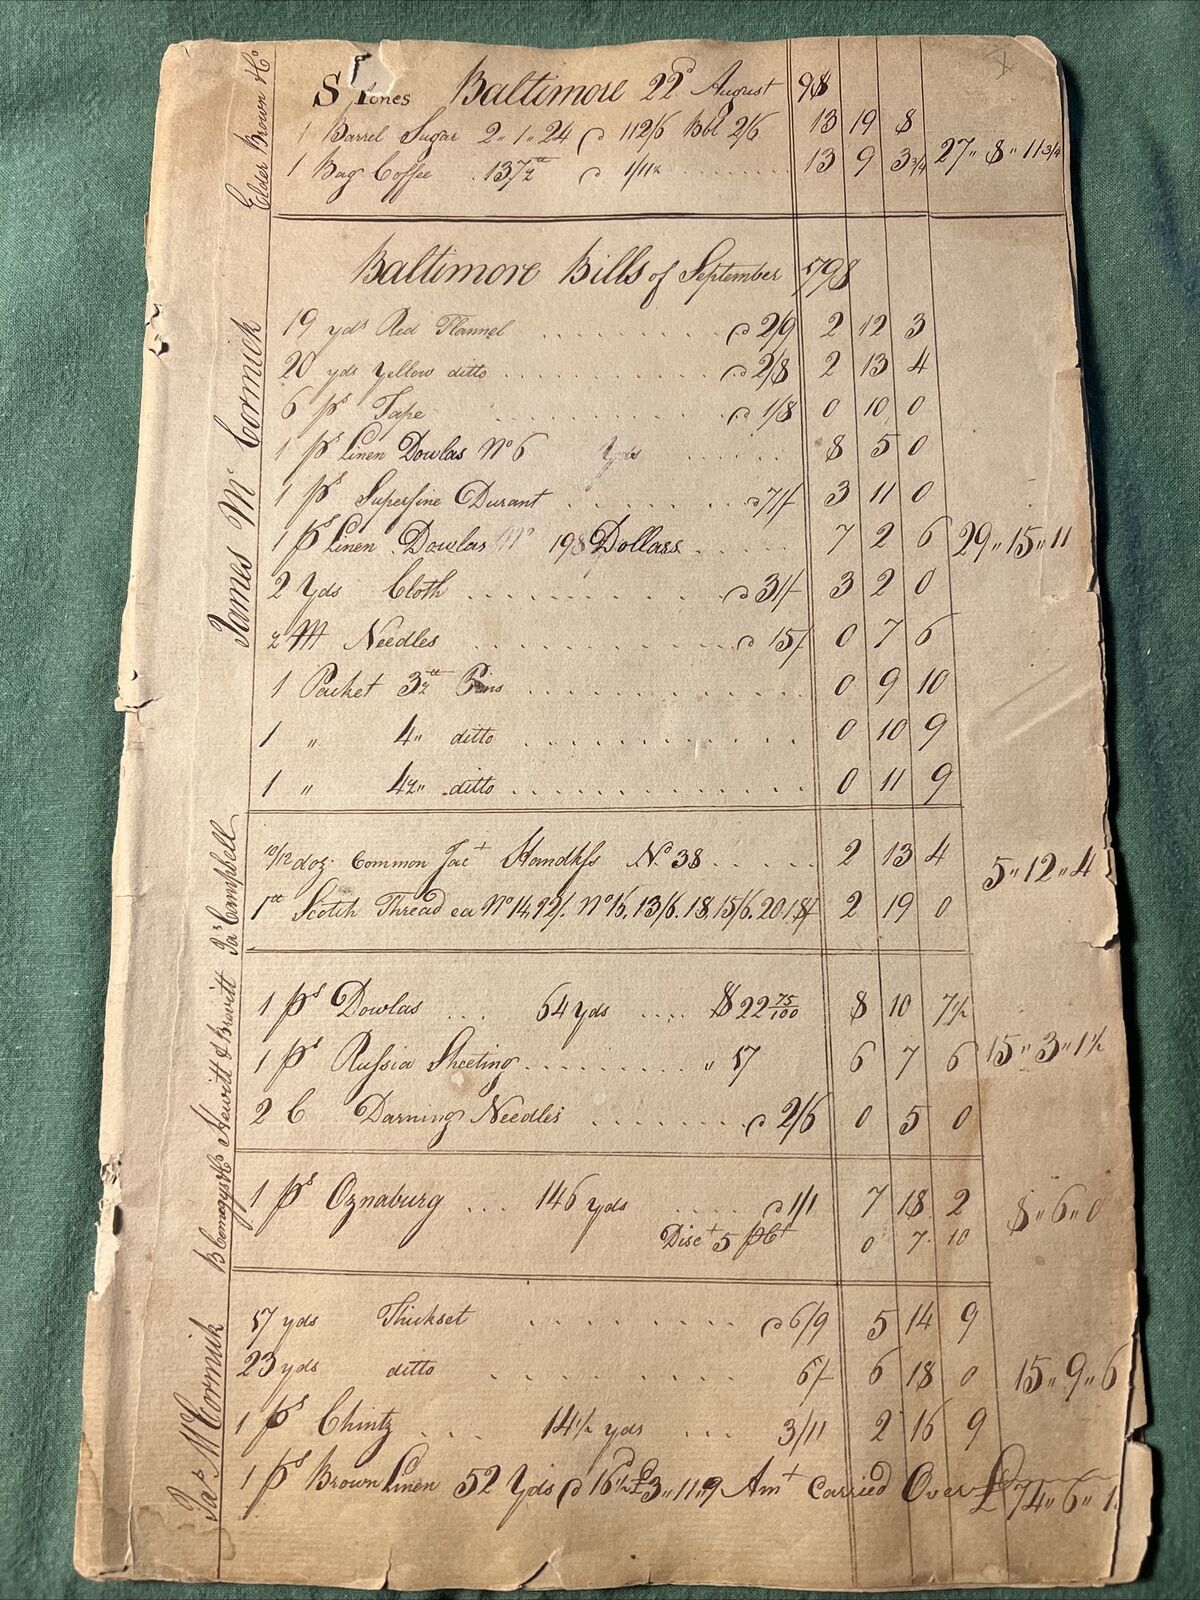 c. 1799 - 1801 STORE LEDGER provisions 13 Pages Alexandria VIRGINIA Baltimore MD